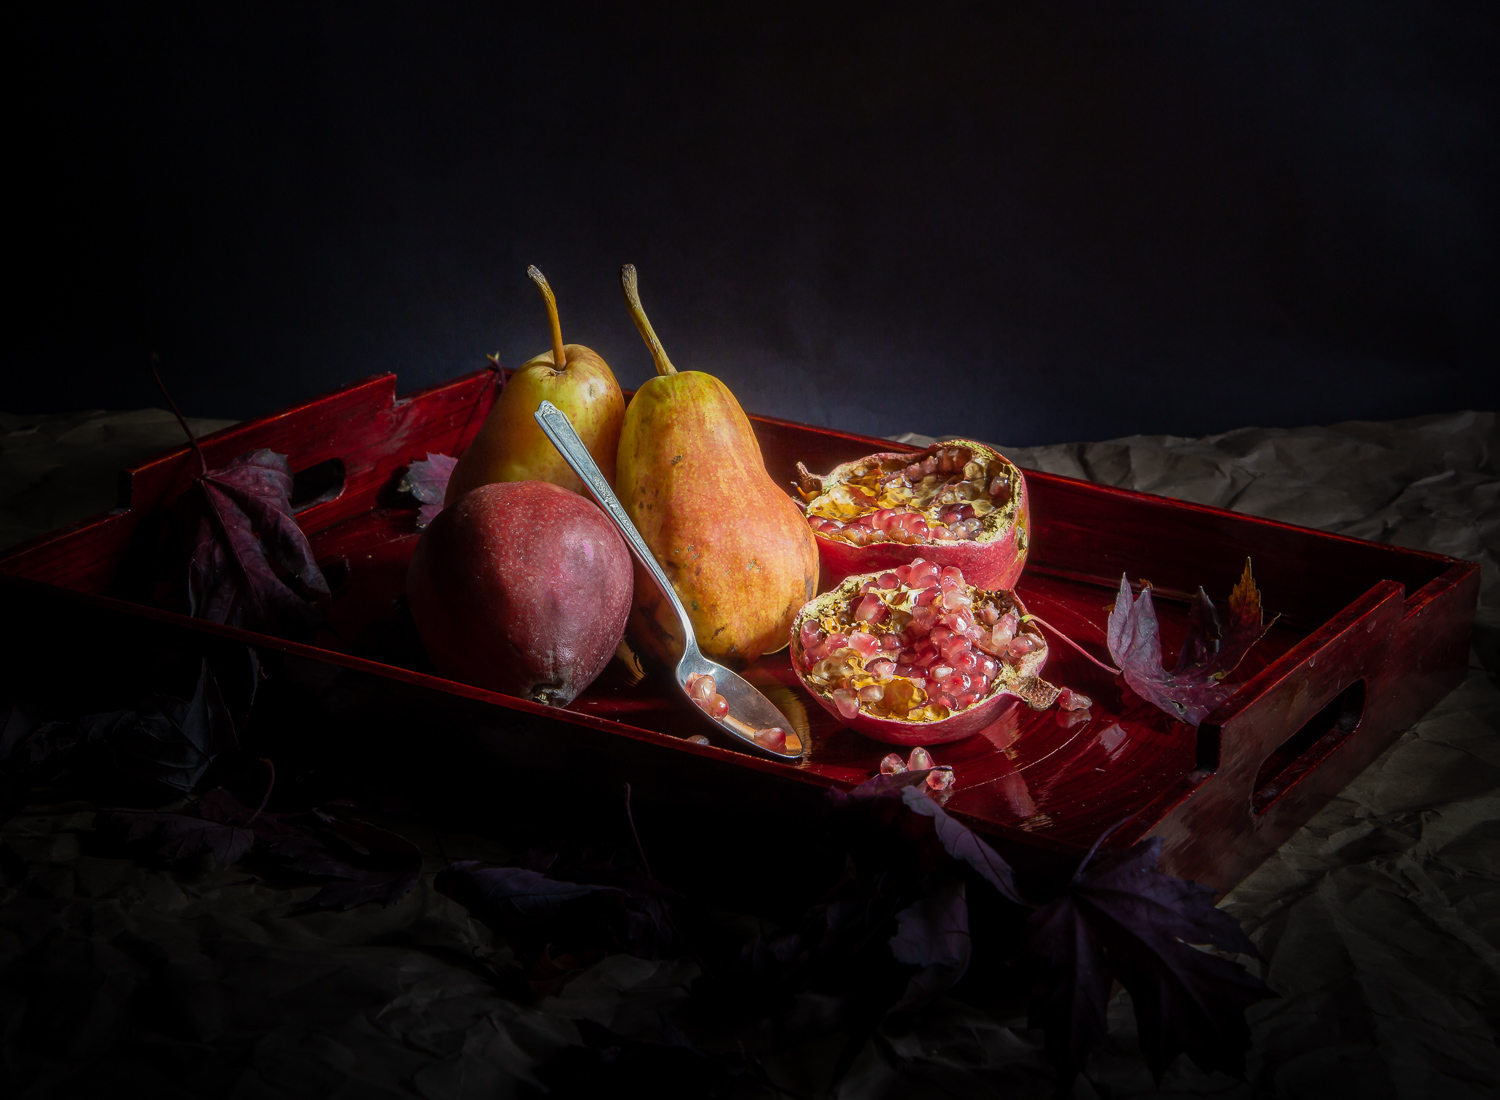 10 Fruit and Vegetable Still Life Photography Tips